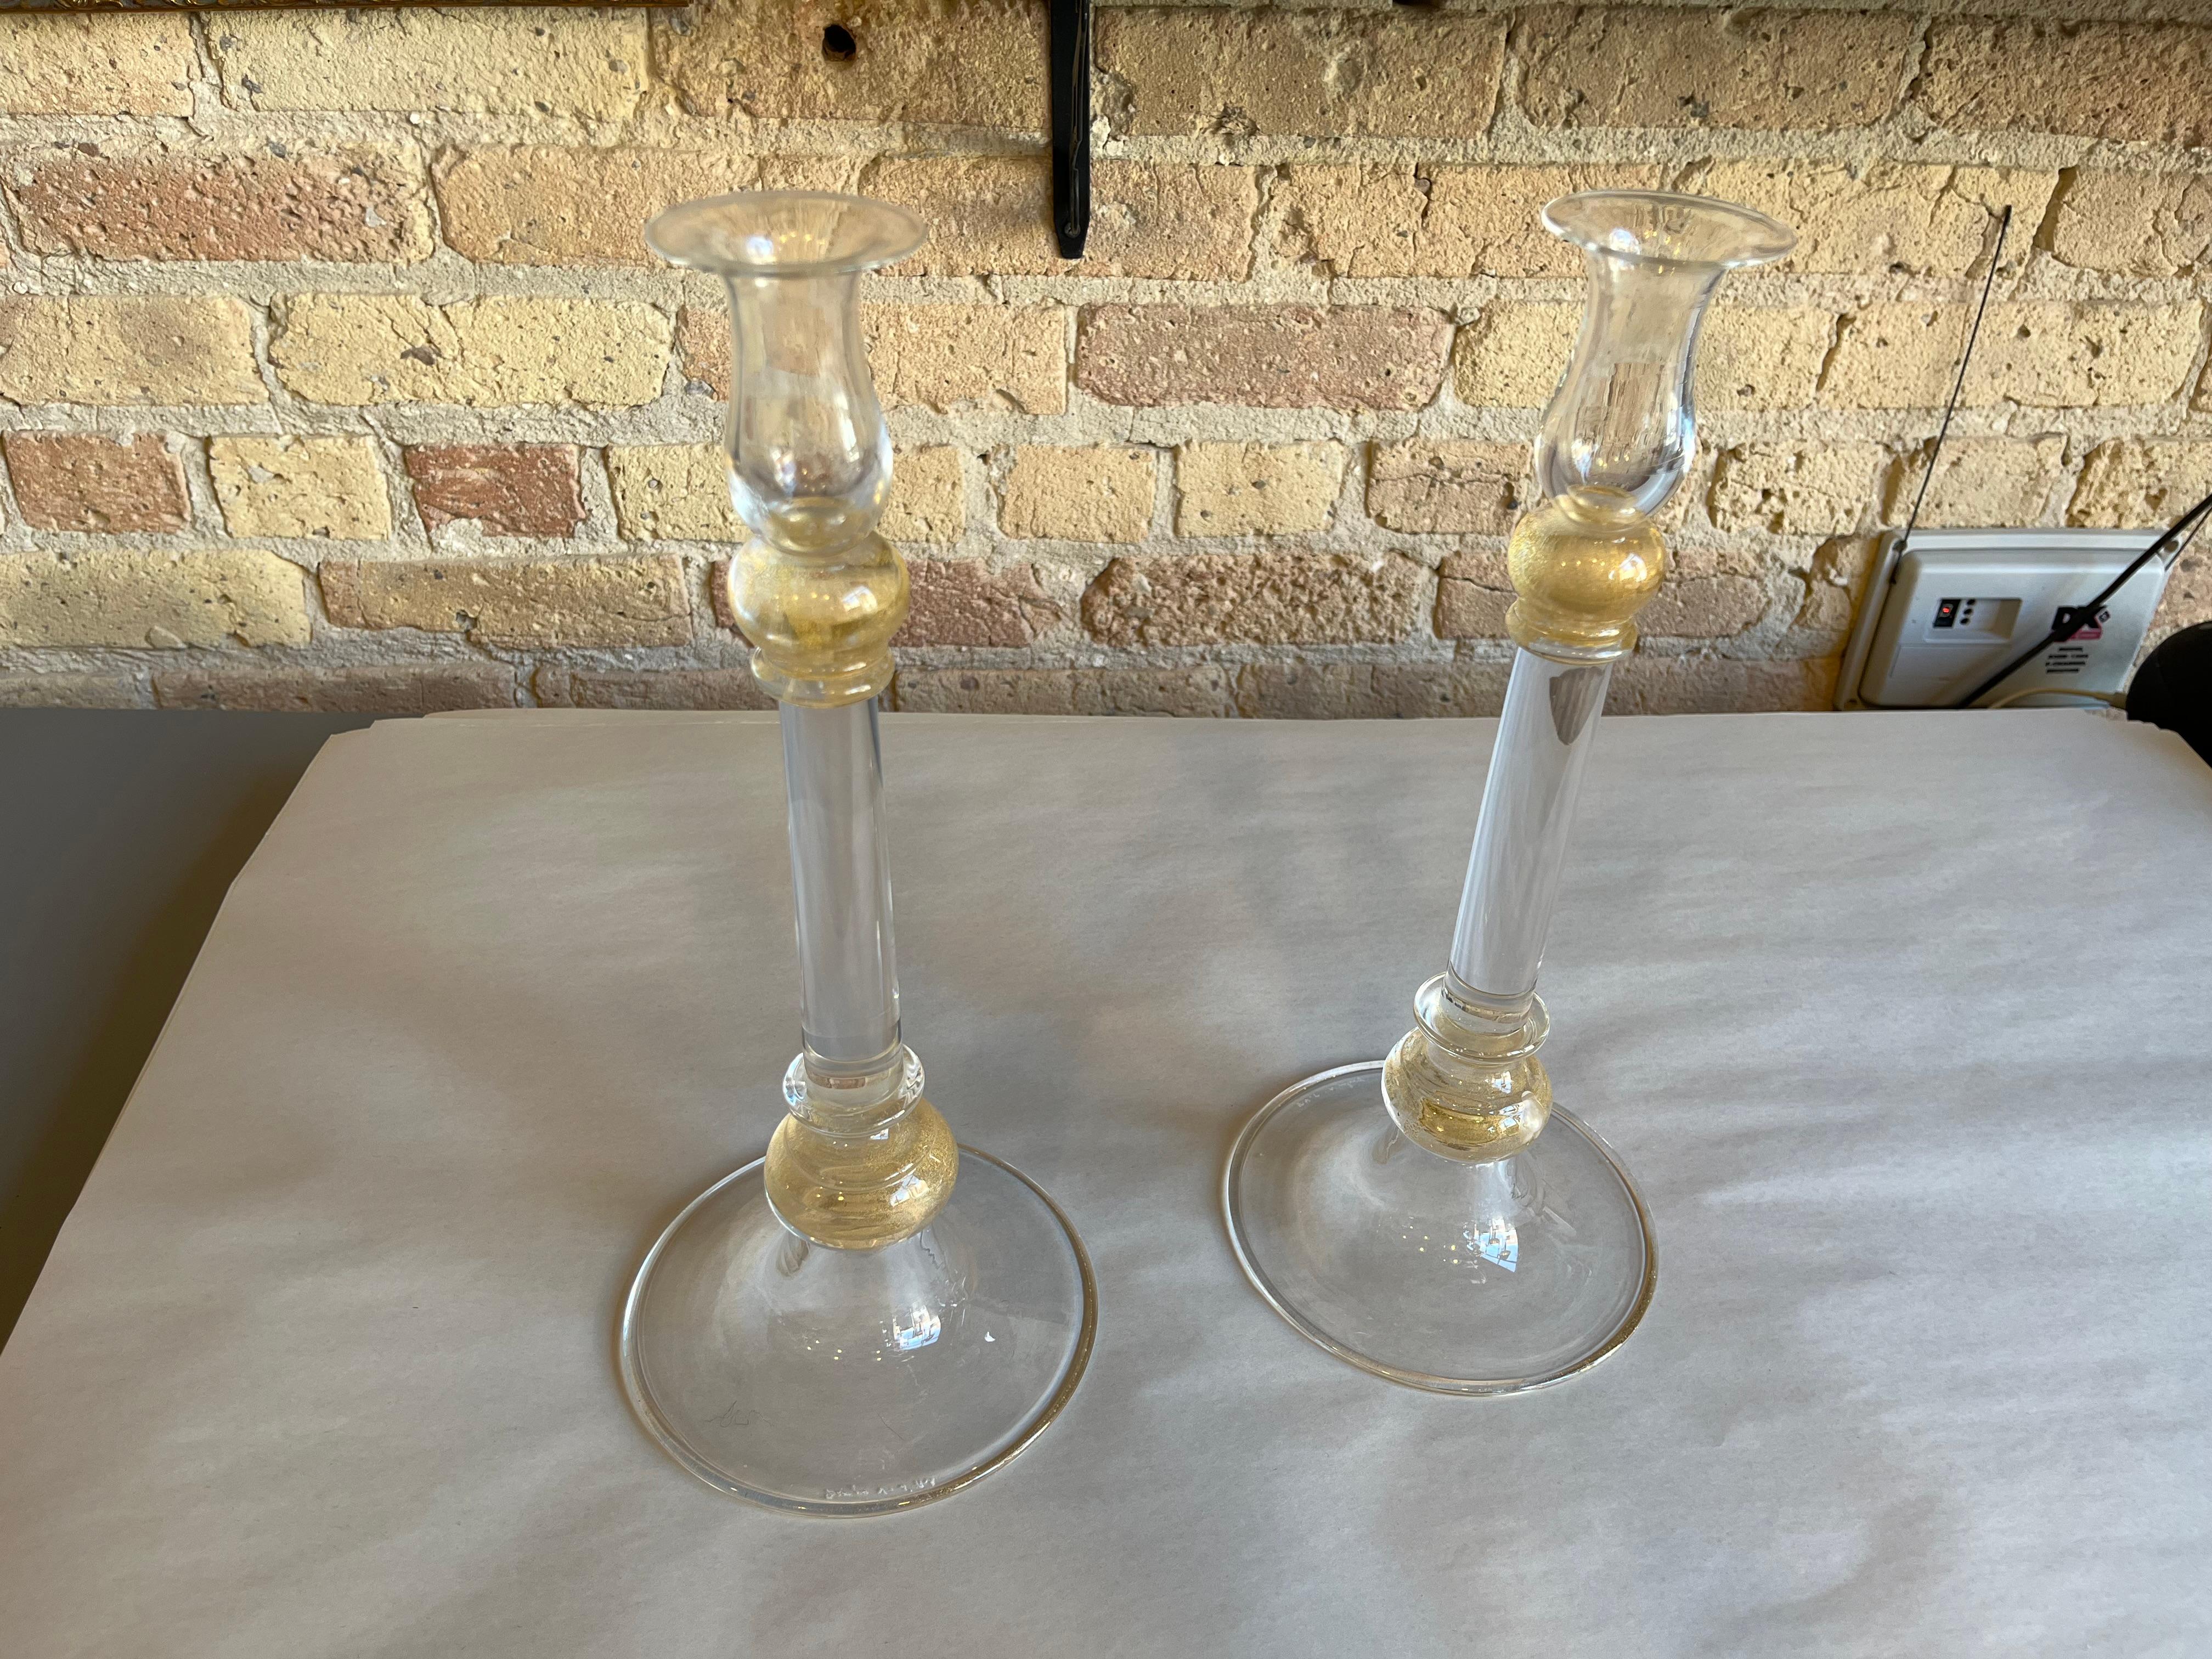 Pair Mid Twentieth Century Murano Glass Candleholders by Seguso Vetri d'arte In Good Condition For Sale In Chicago, IL